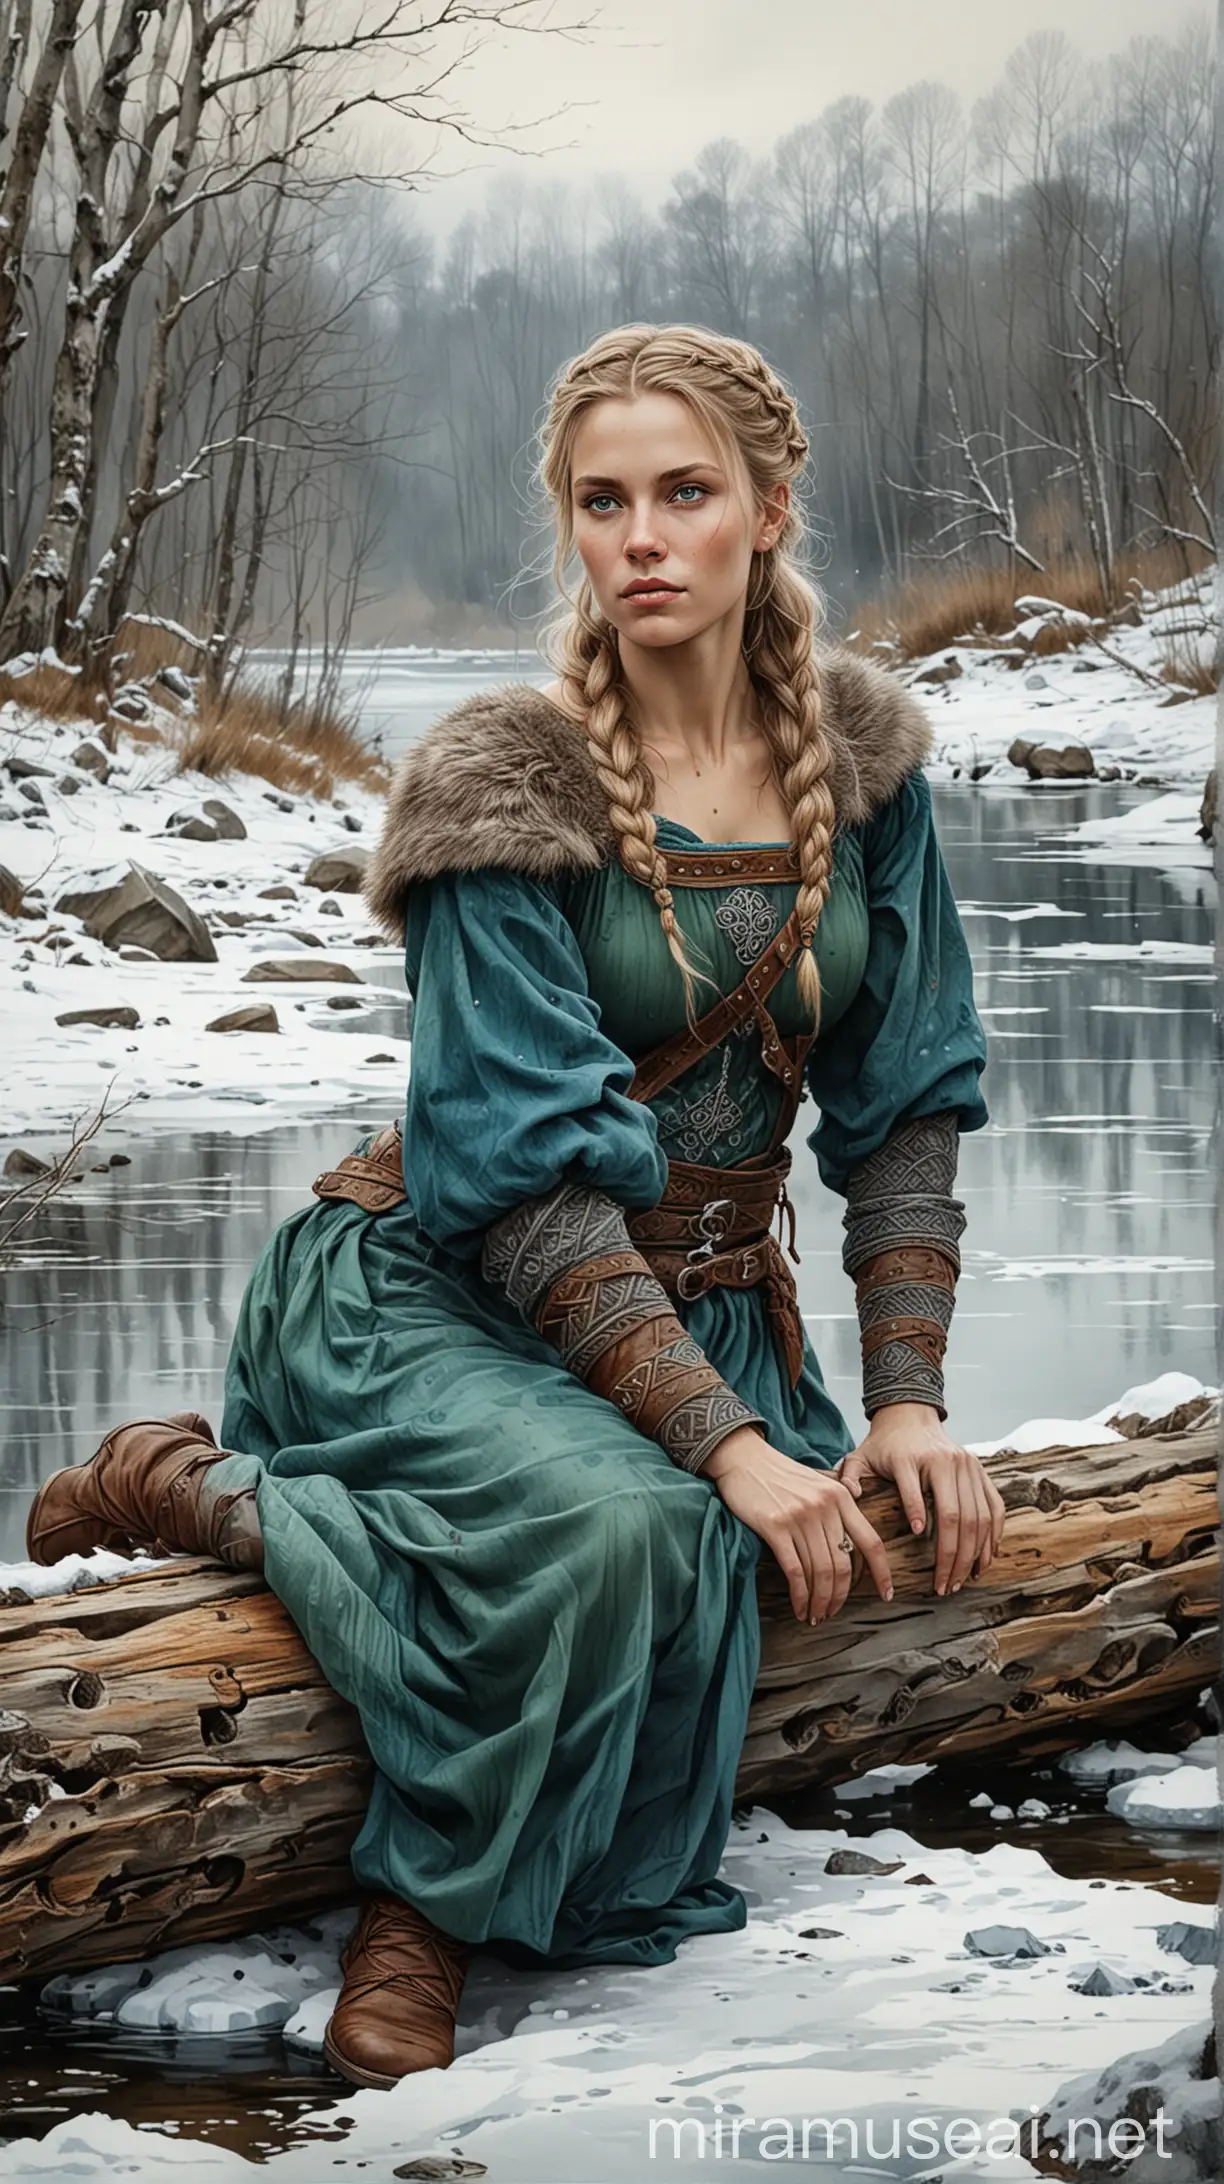 Stunning Viking Woman in Traditional Dress Resting by Riverside